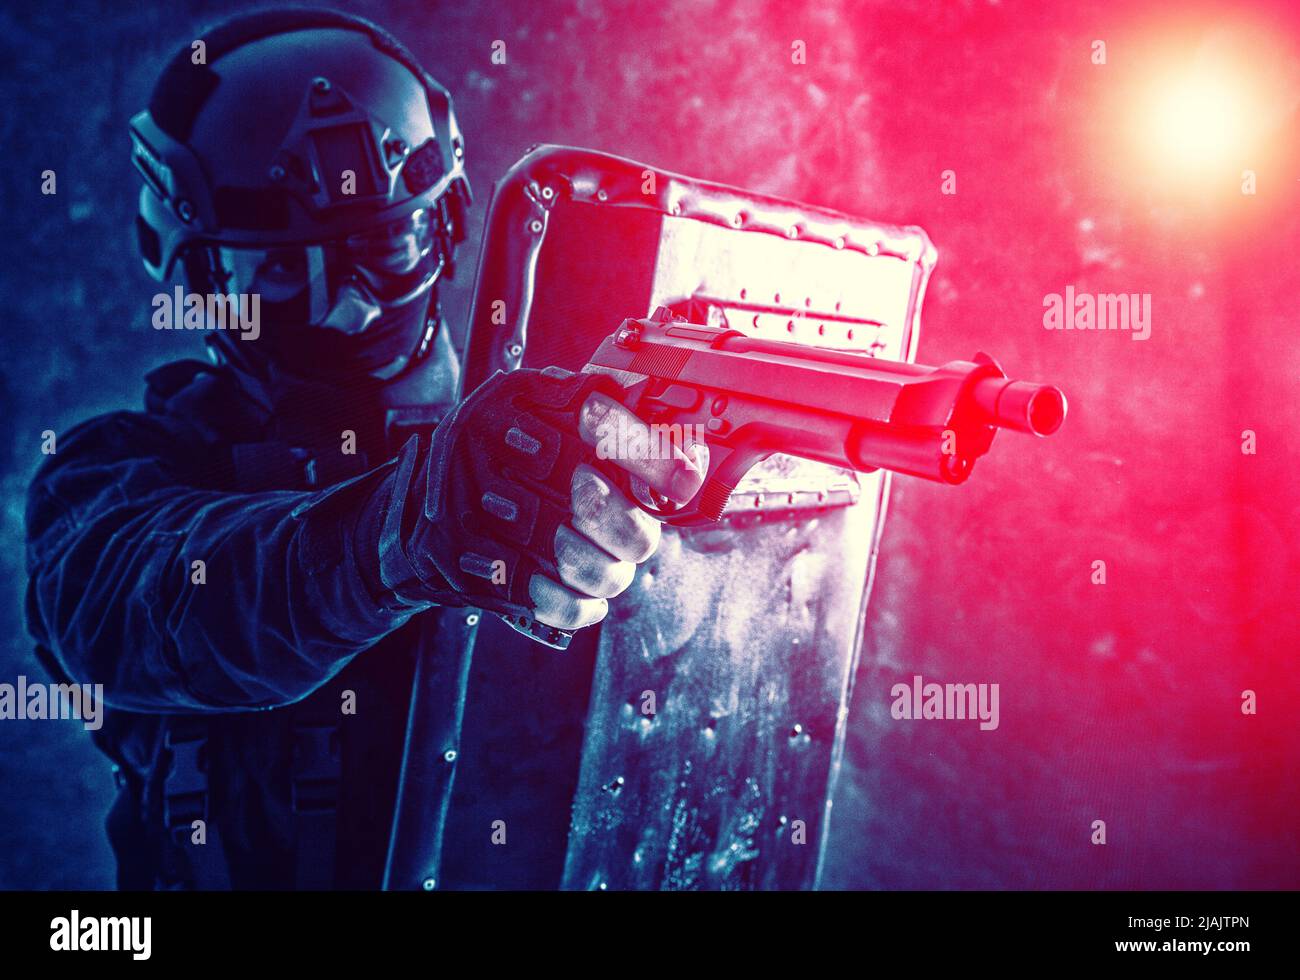 SWAT team fighter aiming pistol from behind ballistic shiield during a firefight. Stock Photo